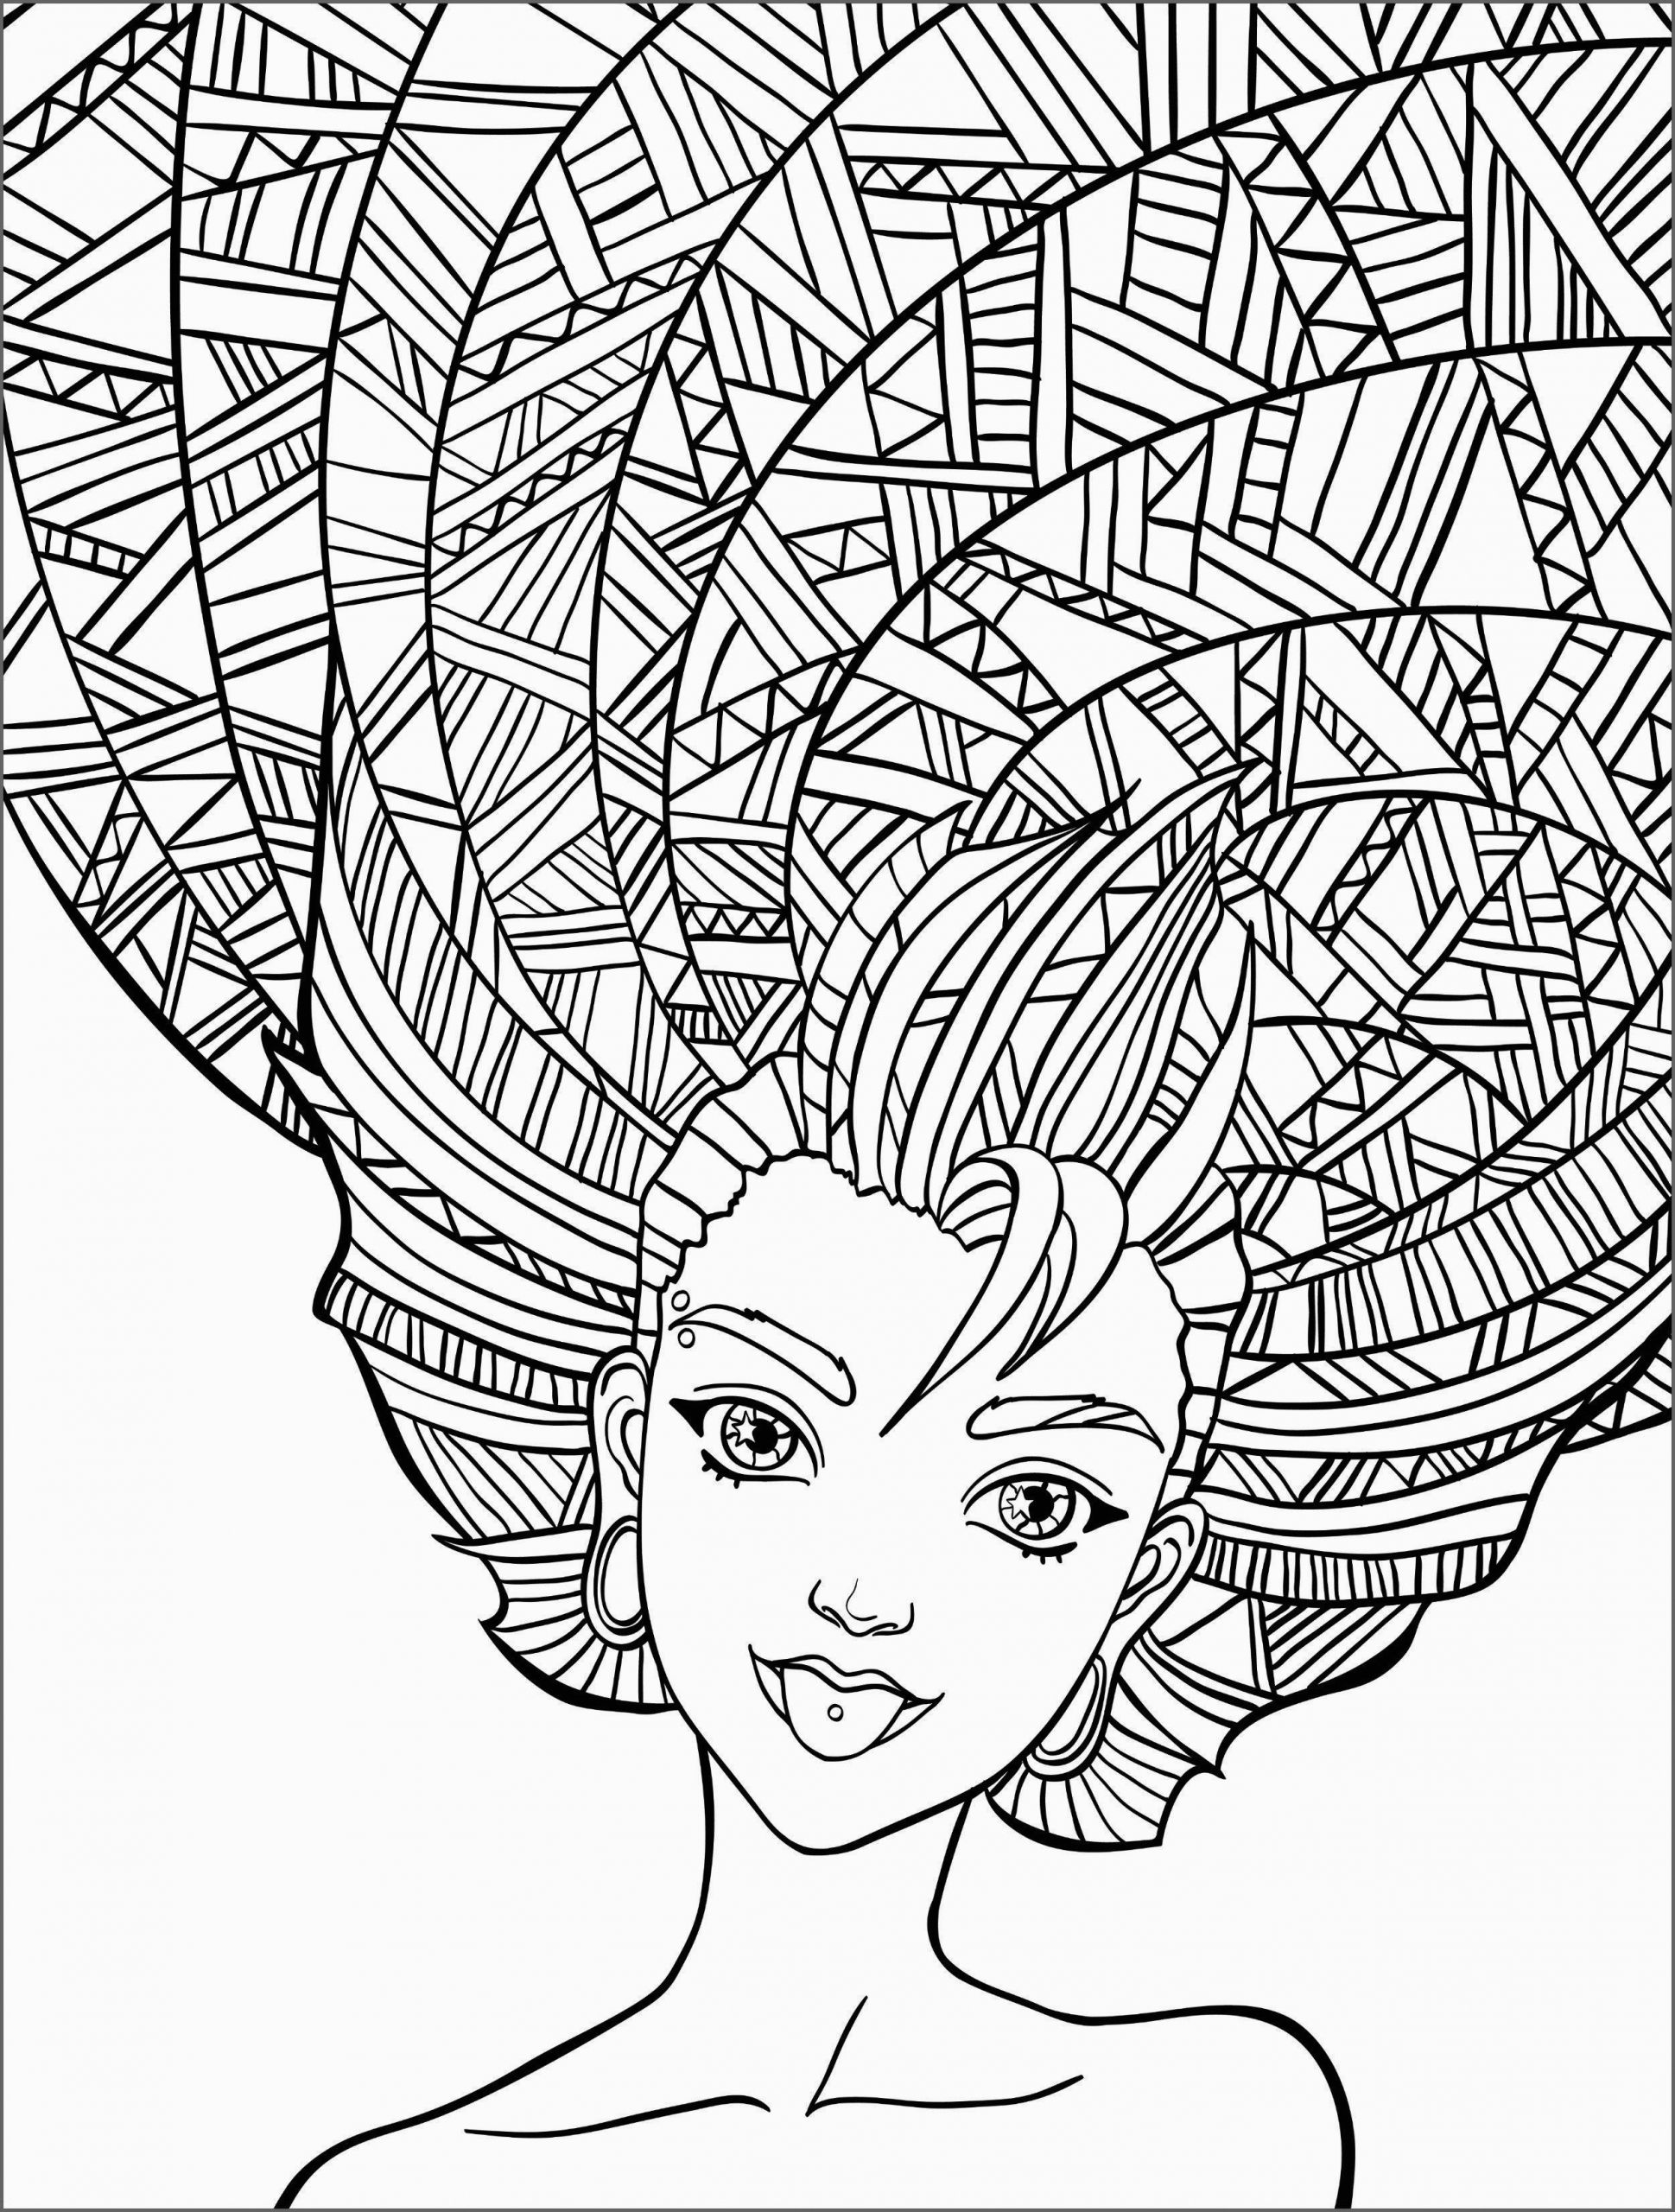 Coloring Pages Adult
 Coloring Pages for Adults Best Coloring Pages For Kids